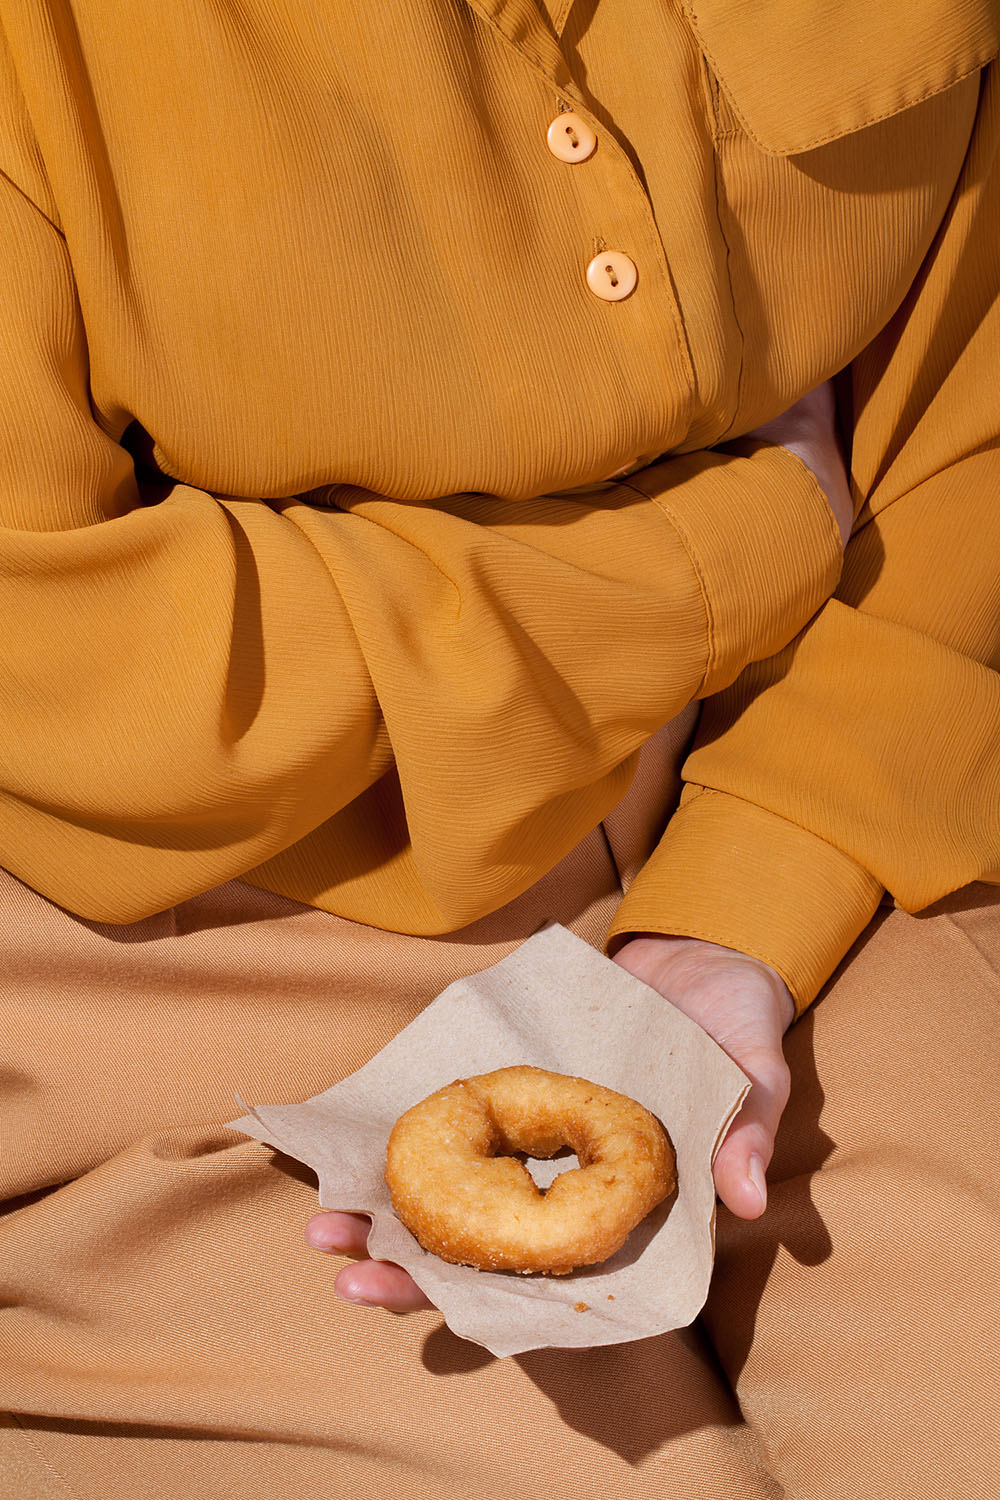 Wardrobe Snacks Delightful Photography Series That Unites Food And Fashion By Kelsey Mcclellan And Michelle Maguire 5